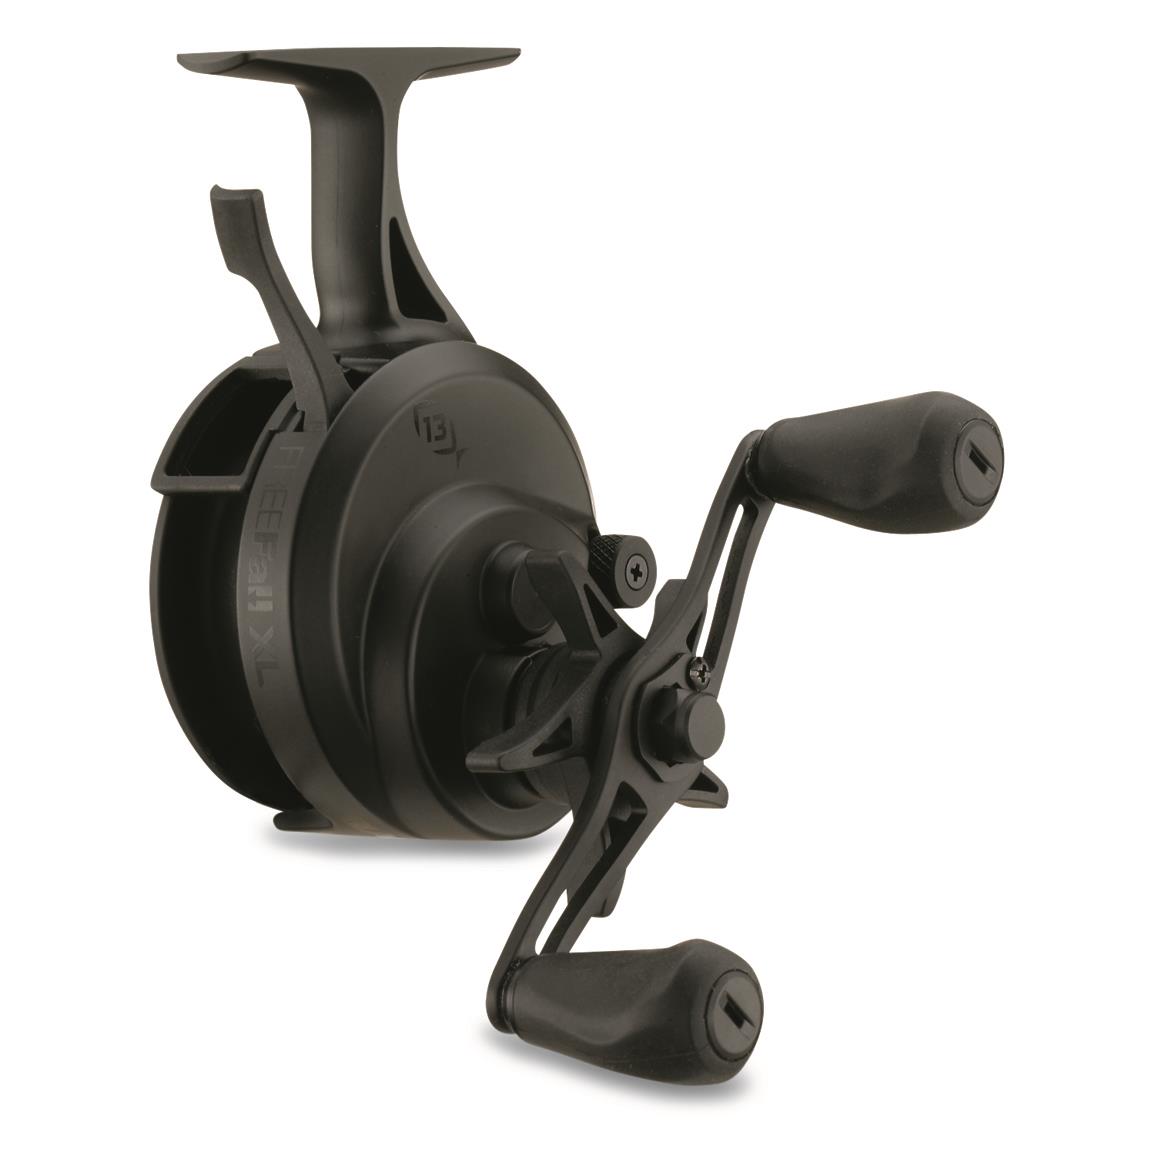 13 Fishing Thermo Ice Spinning Reel - 735079, Ice Fishing Reels at